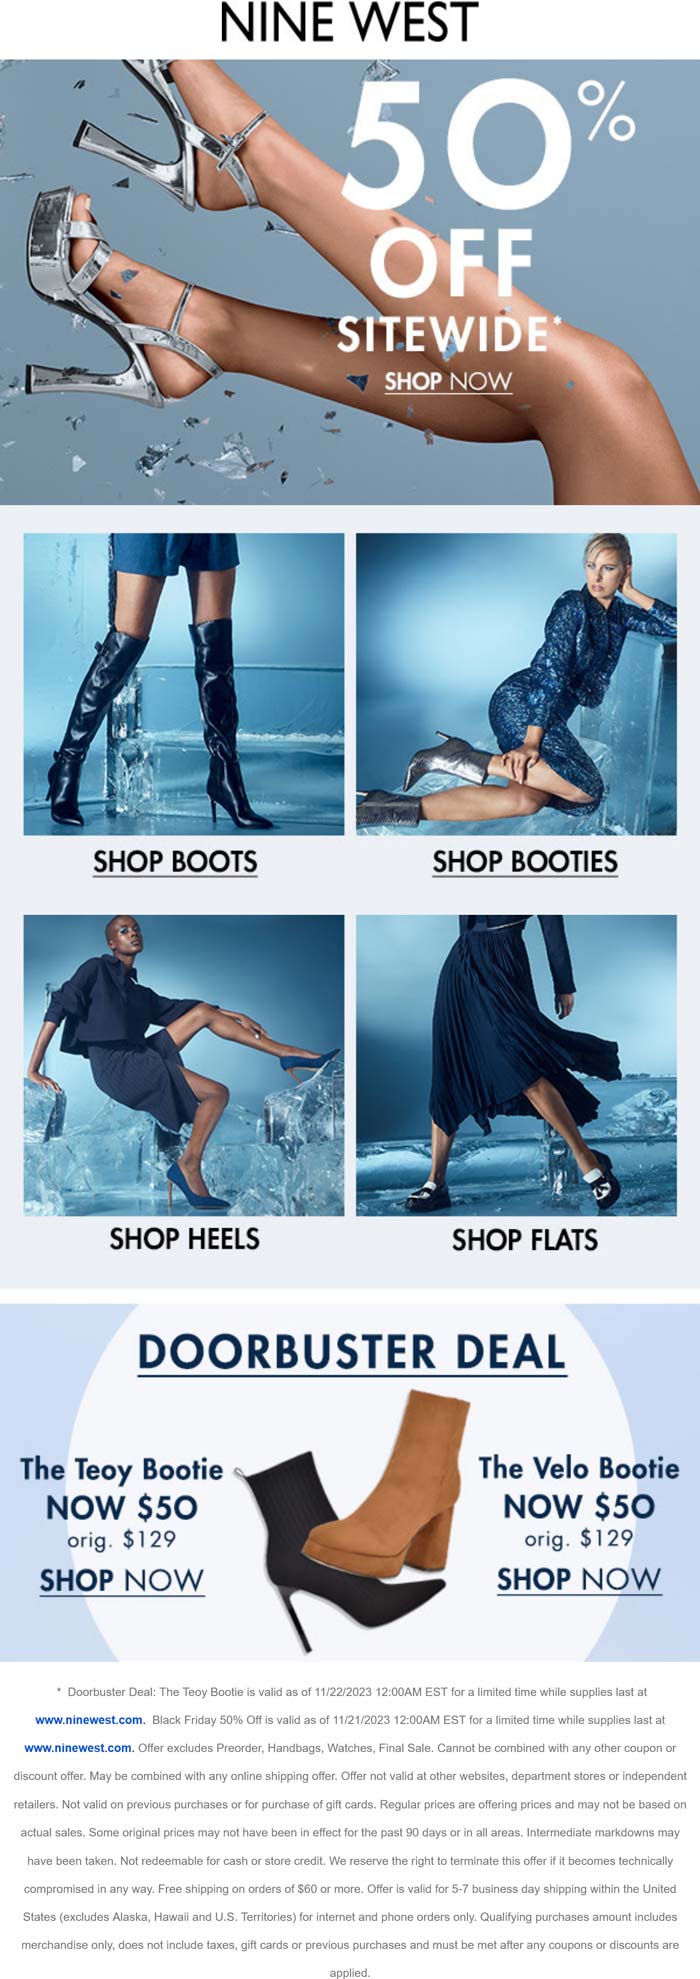 Nine West stores Coupon  50% off everything online at Nine West #ninewest 